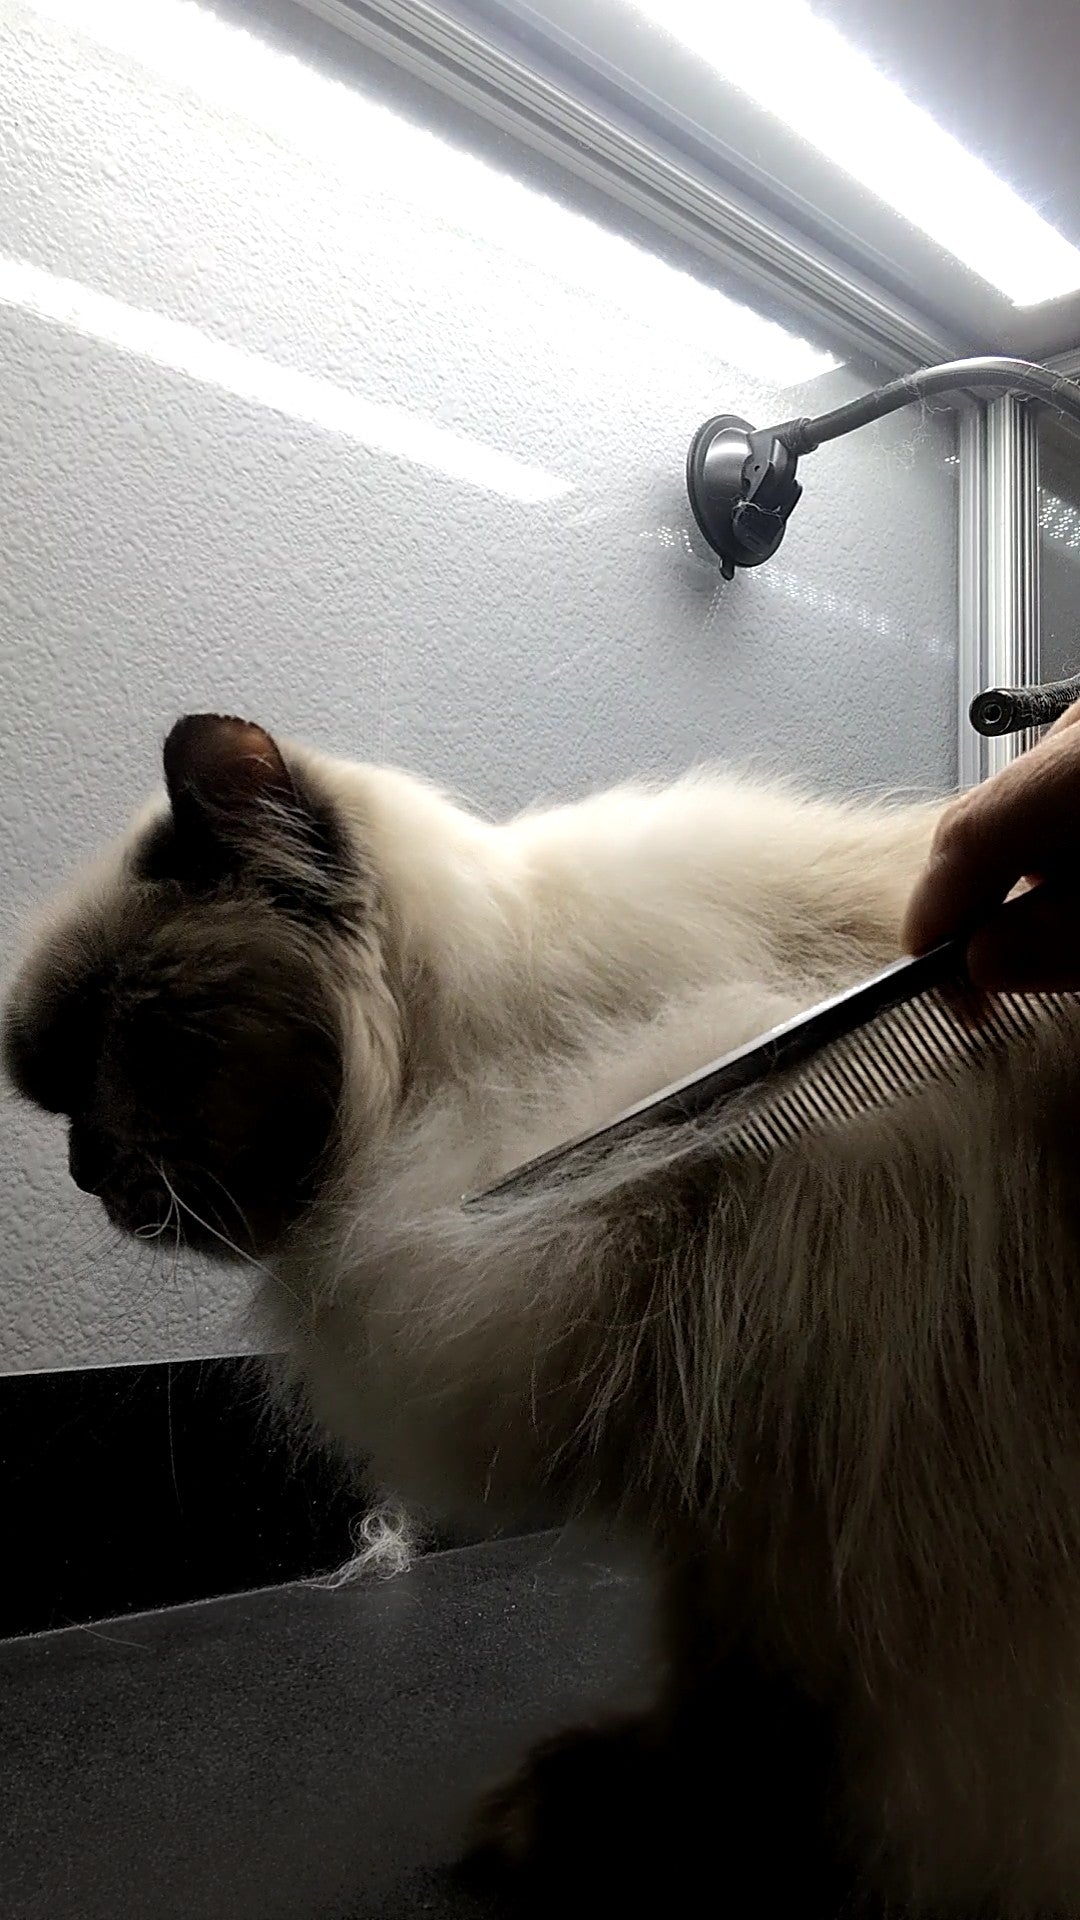 Load video: Solomon is an 18 year old Himalayan cat. He&#39;s getting a long hair full coat groom today. He had a lot of shedding coat, grubby ears and litter stuck in he paws. After a bath, tidy, blow dry and comb out, he was fresh and feeling great.